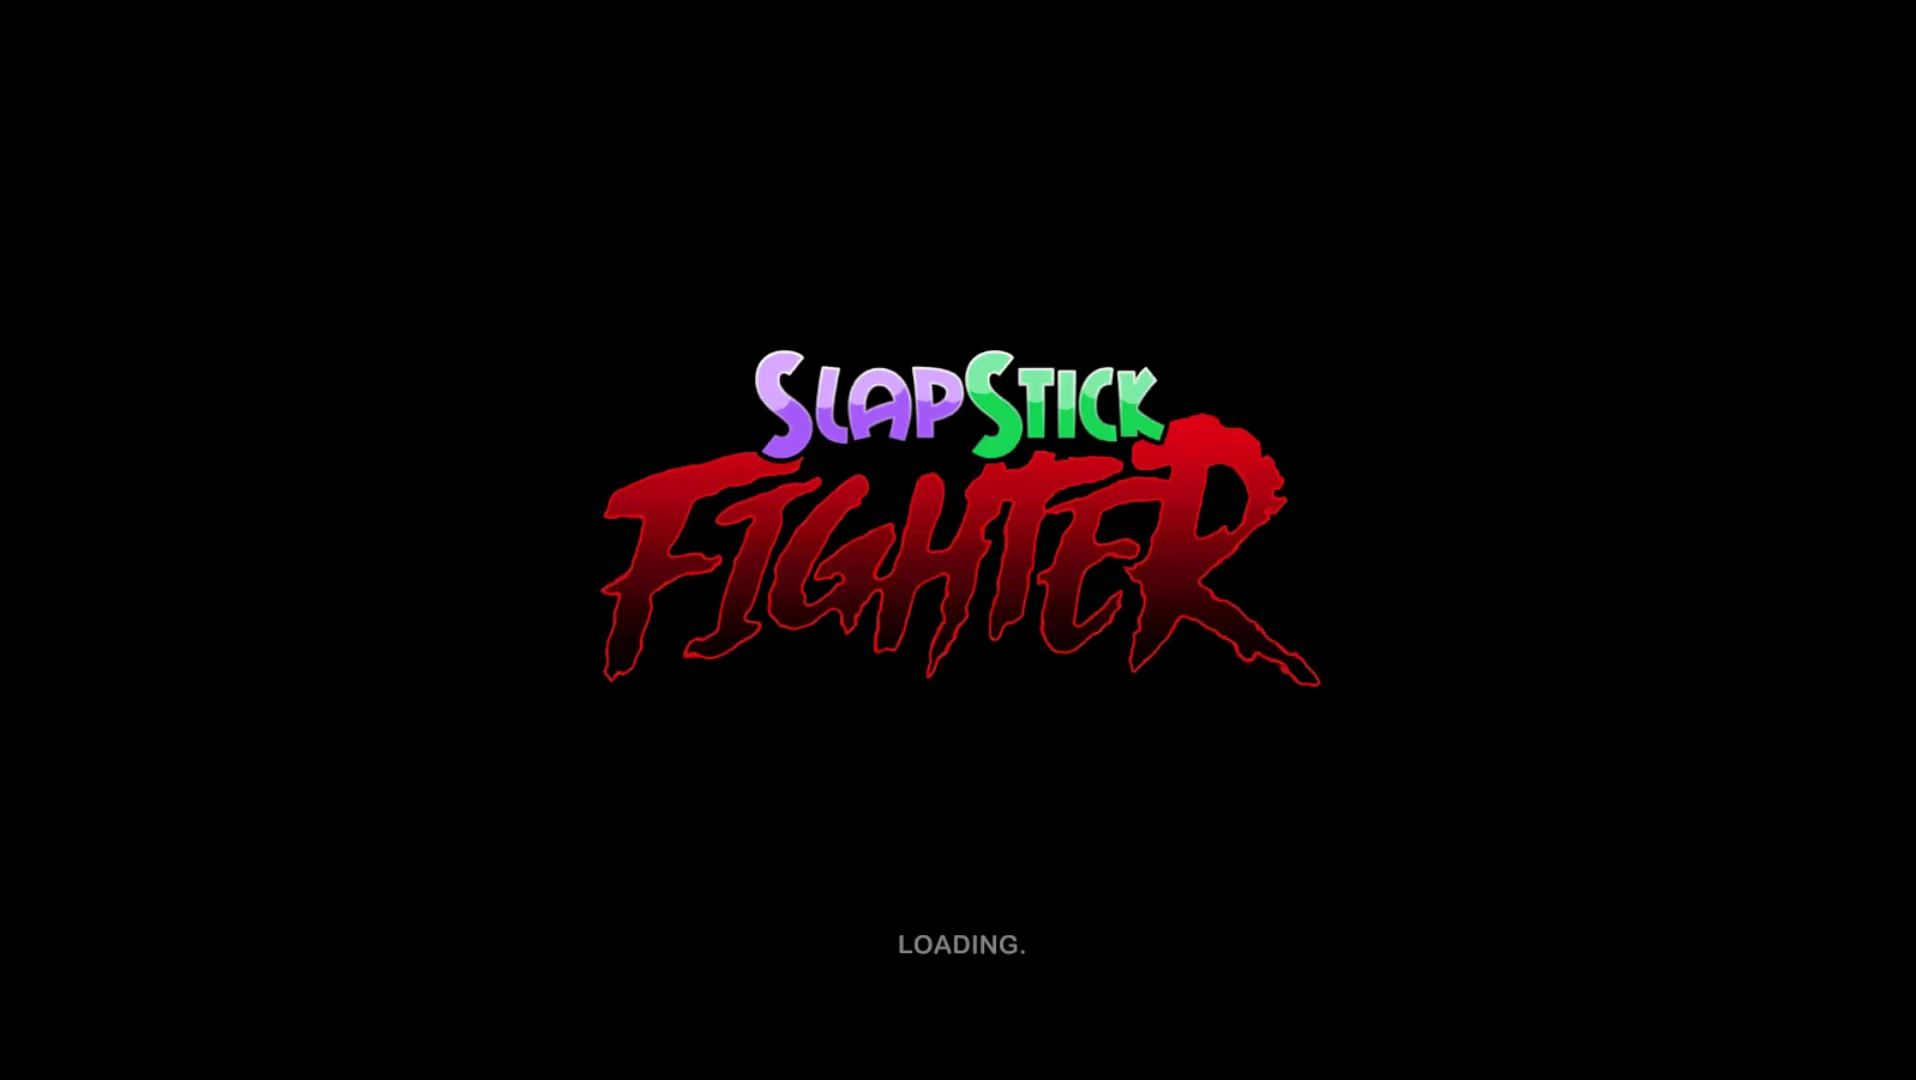 Full version of Android Stickman game apk Slapstick Fighter - Fight Game for tablet and phone.